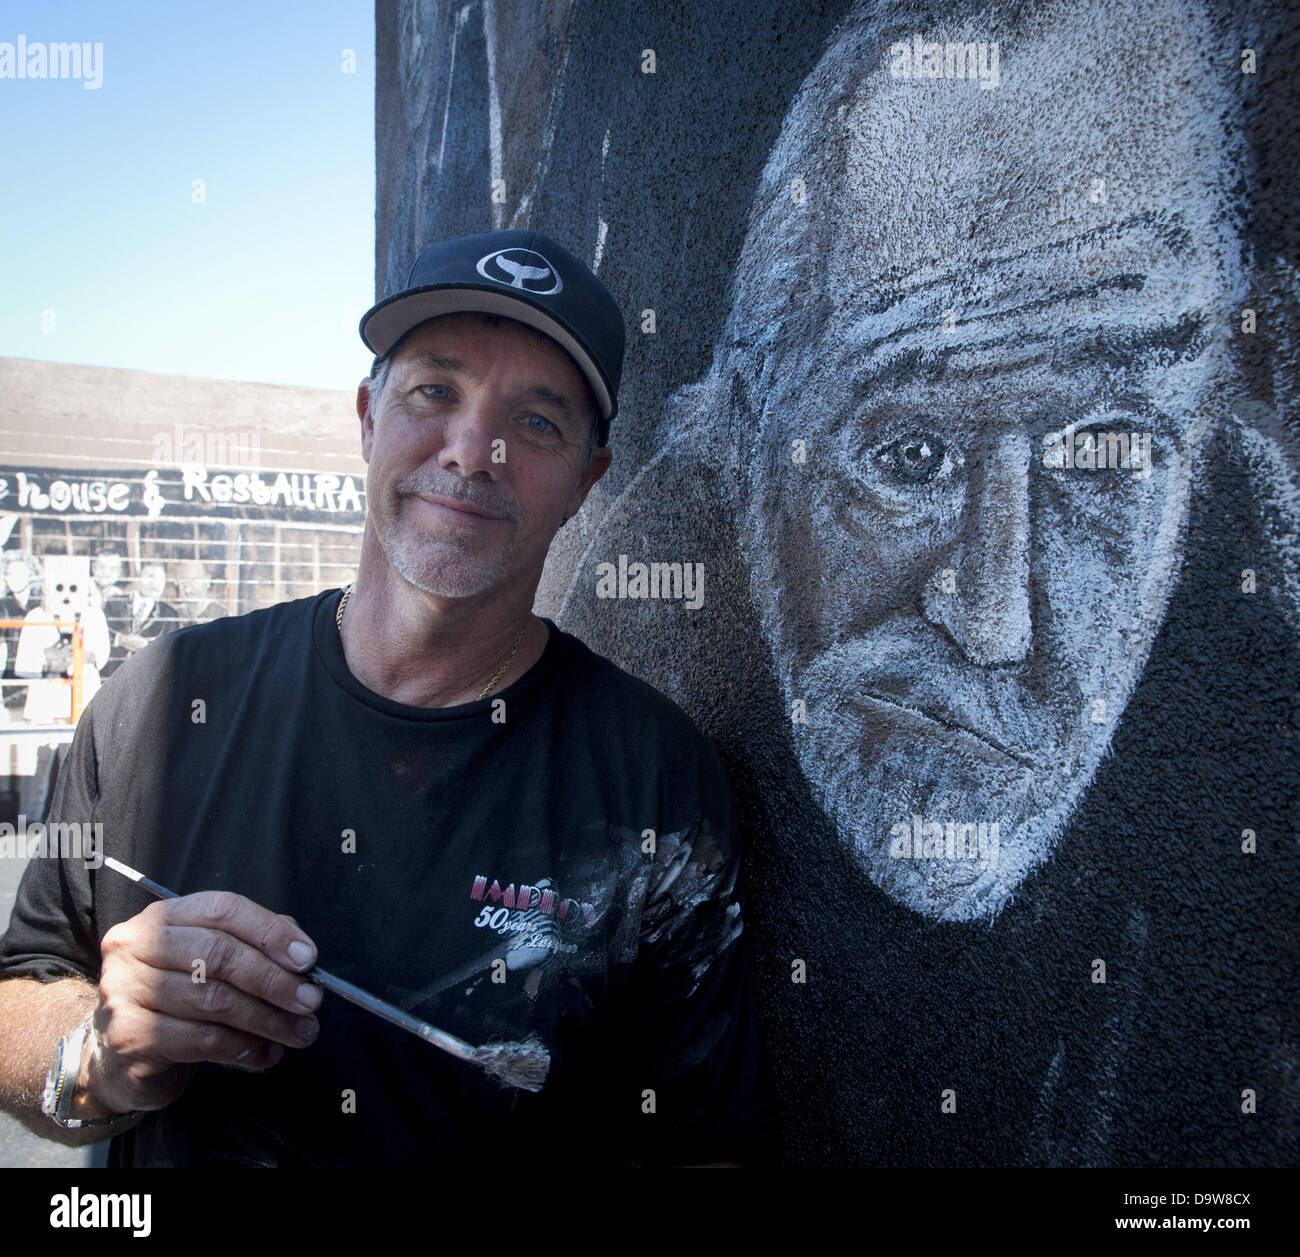 Los Angeles, California, USA. 26th June, 2013. WYLAND stands alongside his nearly completed mural at the Hollywood Improve on Melrose Avenue in Los Angeles on Wednesday, June 26, 2013. WYLAND painted 57 well known comics in larger than life dimensions on the walls surrounding the entrance to the famed comedy club. WYAND and the Wyland Foundation support water conservation, coming together over the last several months with ''Comics For Water Conservation,'' in order to raise money to support the National Mayor's Challenge for Water Conservation.'' In the photo Wyand alongside his portrait of Stock Photo